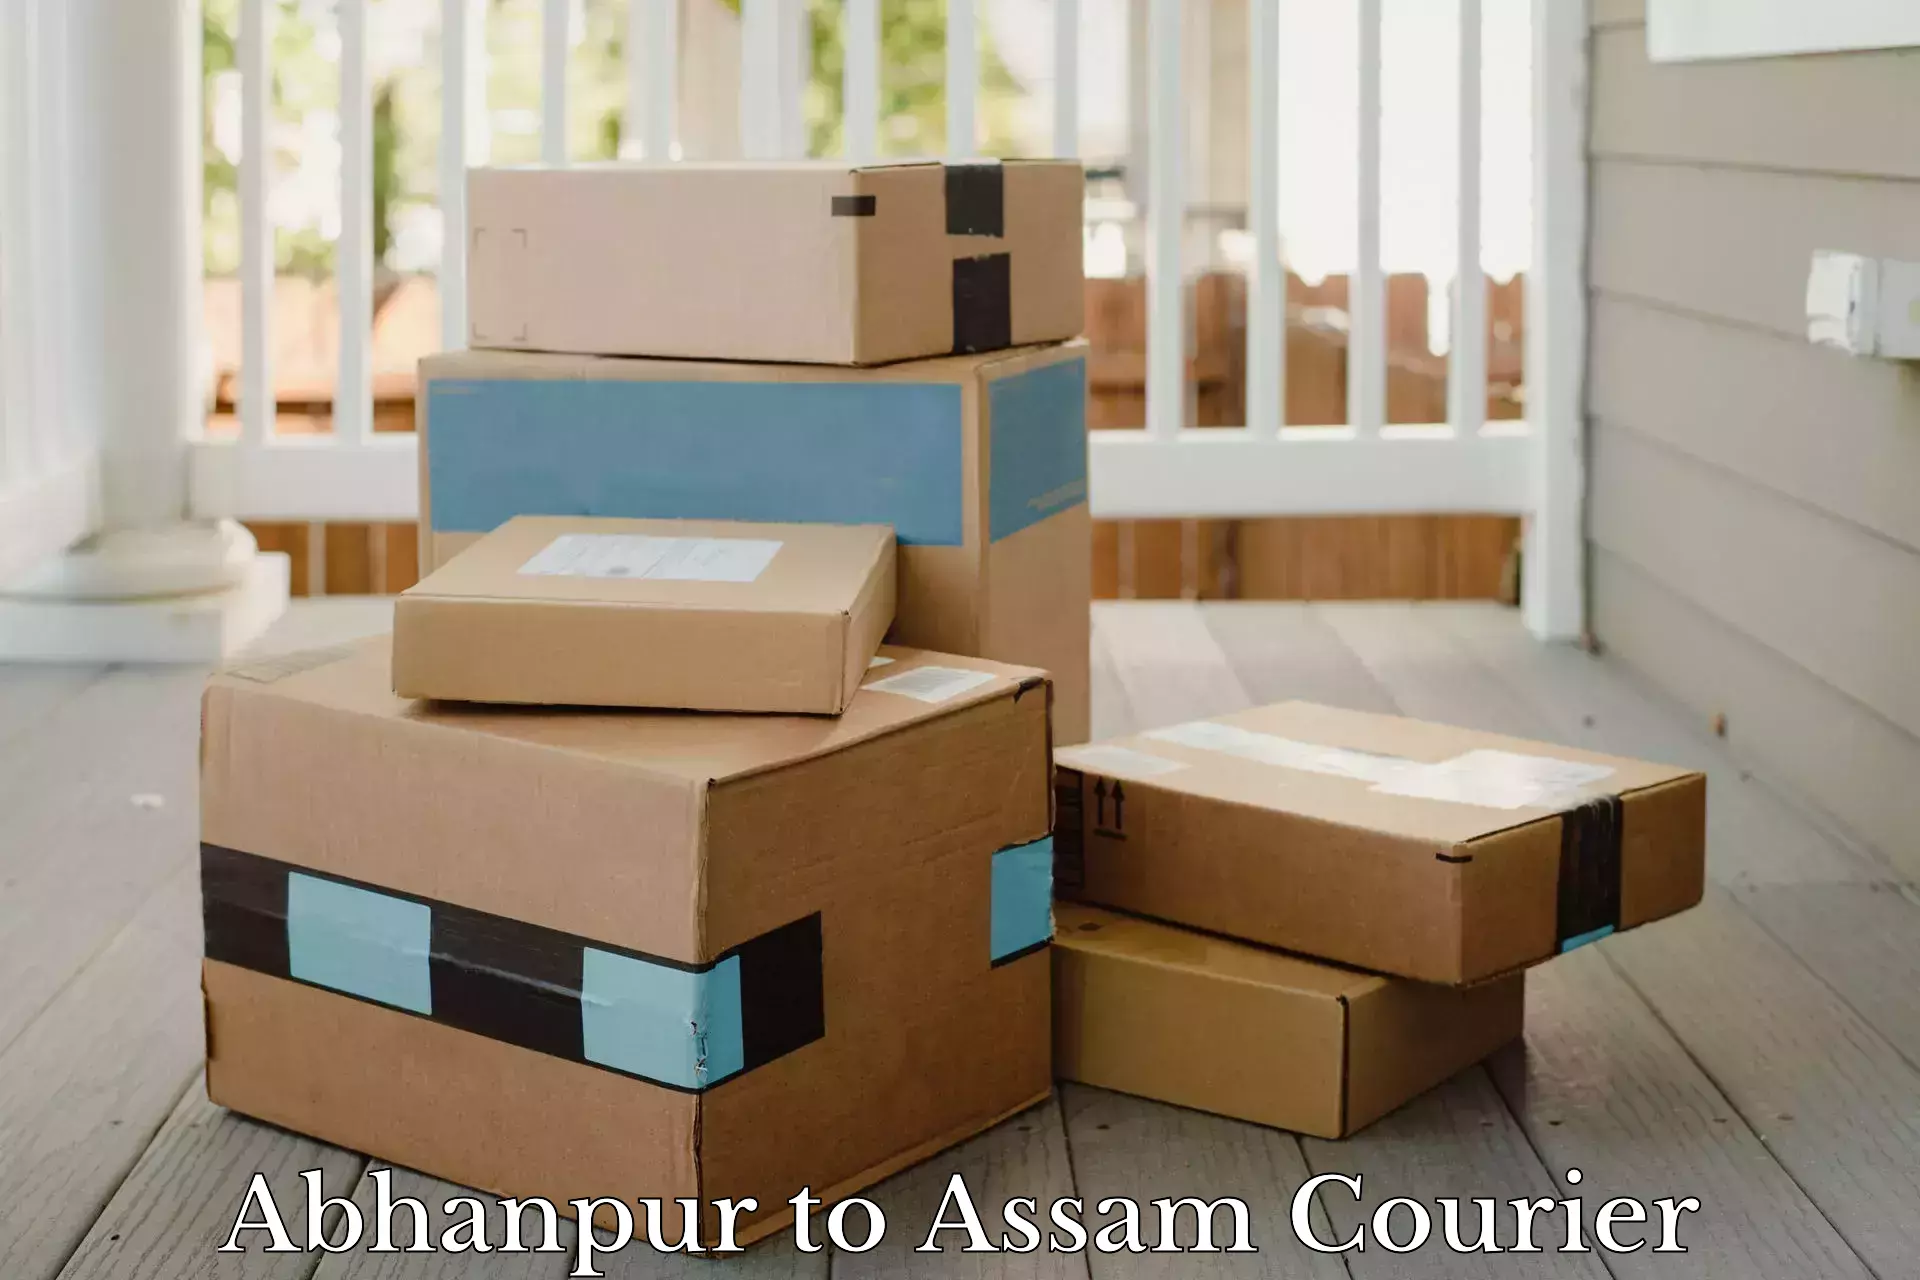 Automated parcel services Abhanpur to Dergaon